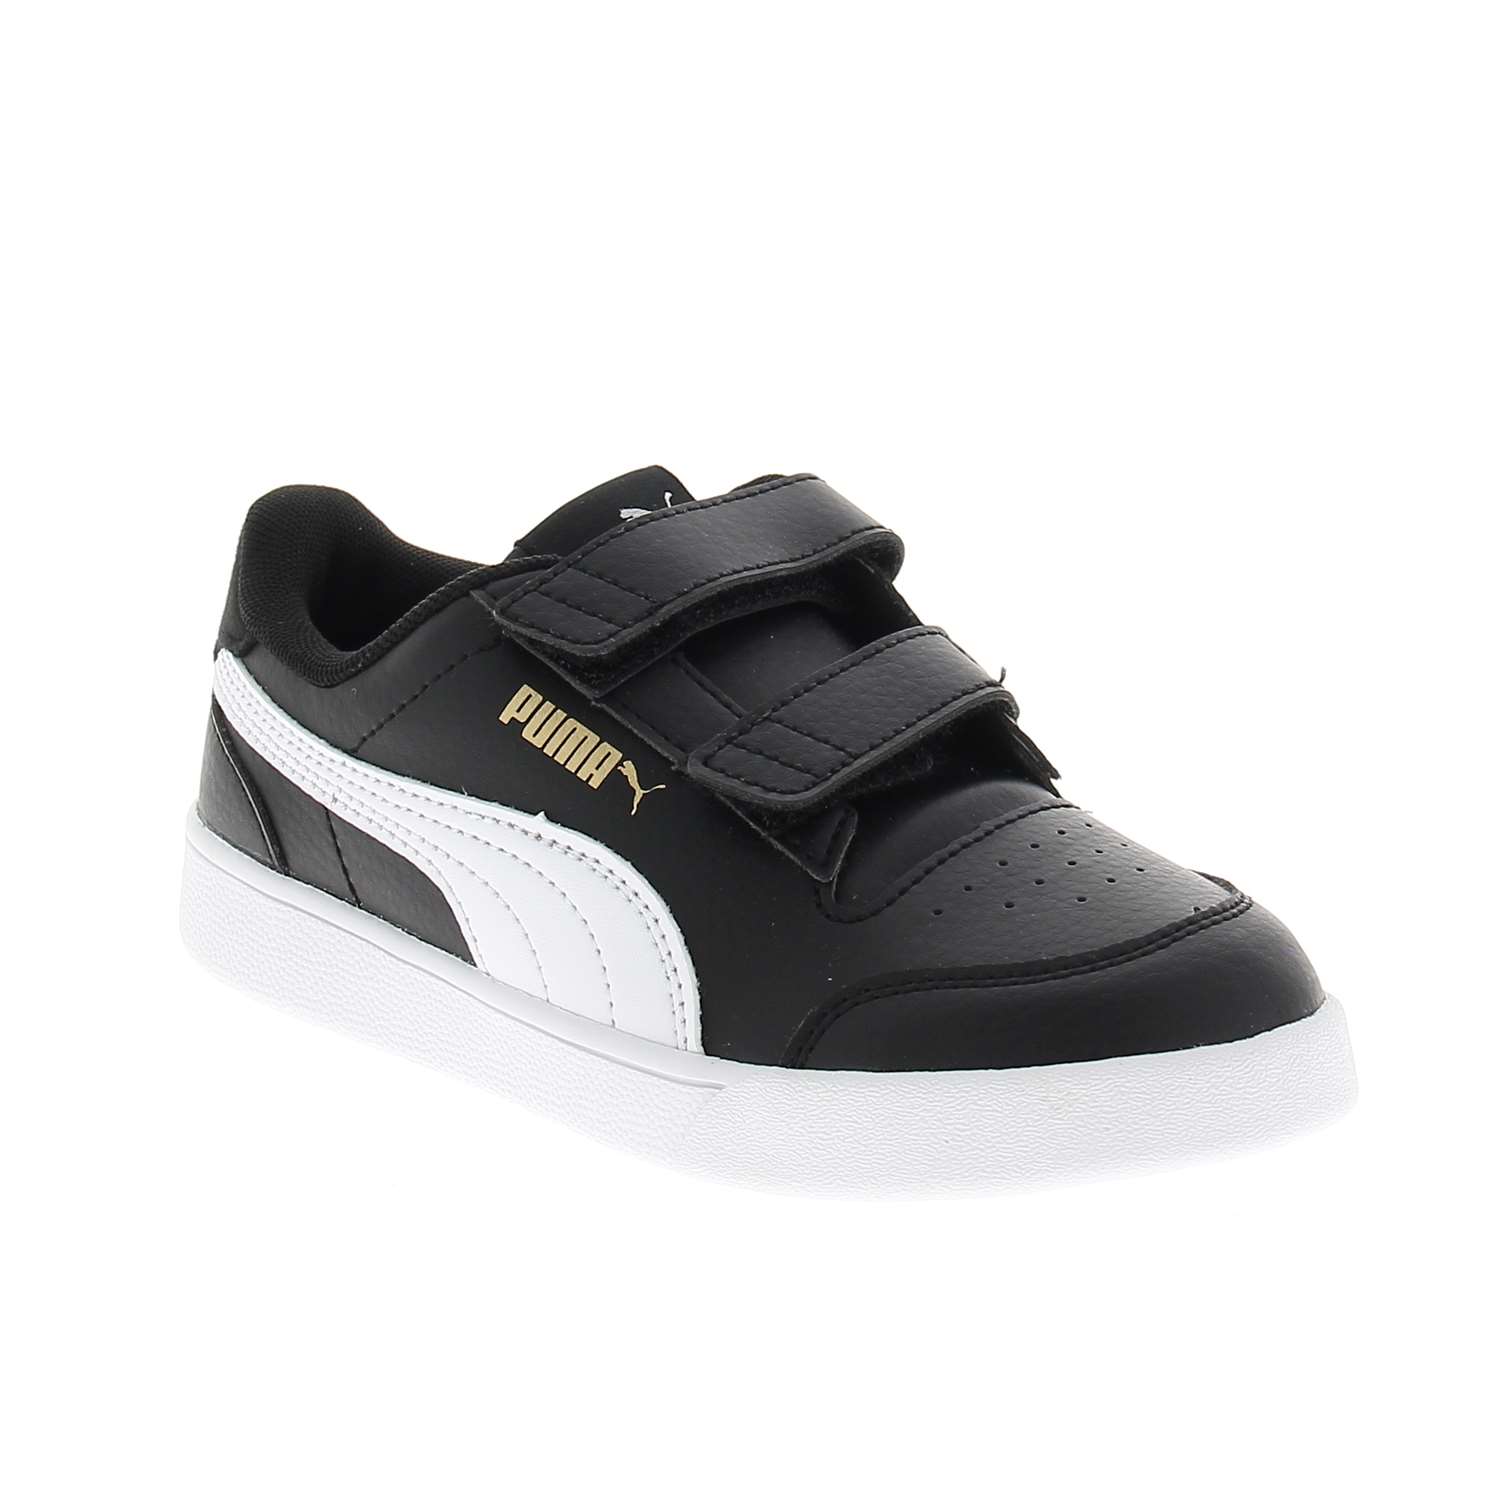 01 - SHUFFLE V INF PS - PUMA - Baskets - Synthétique